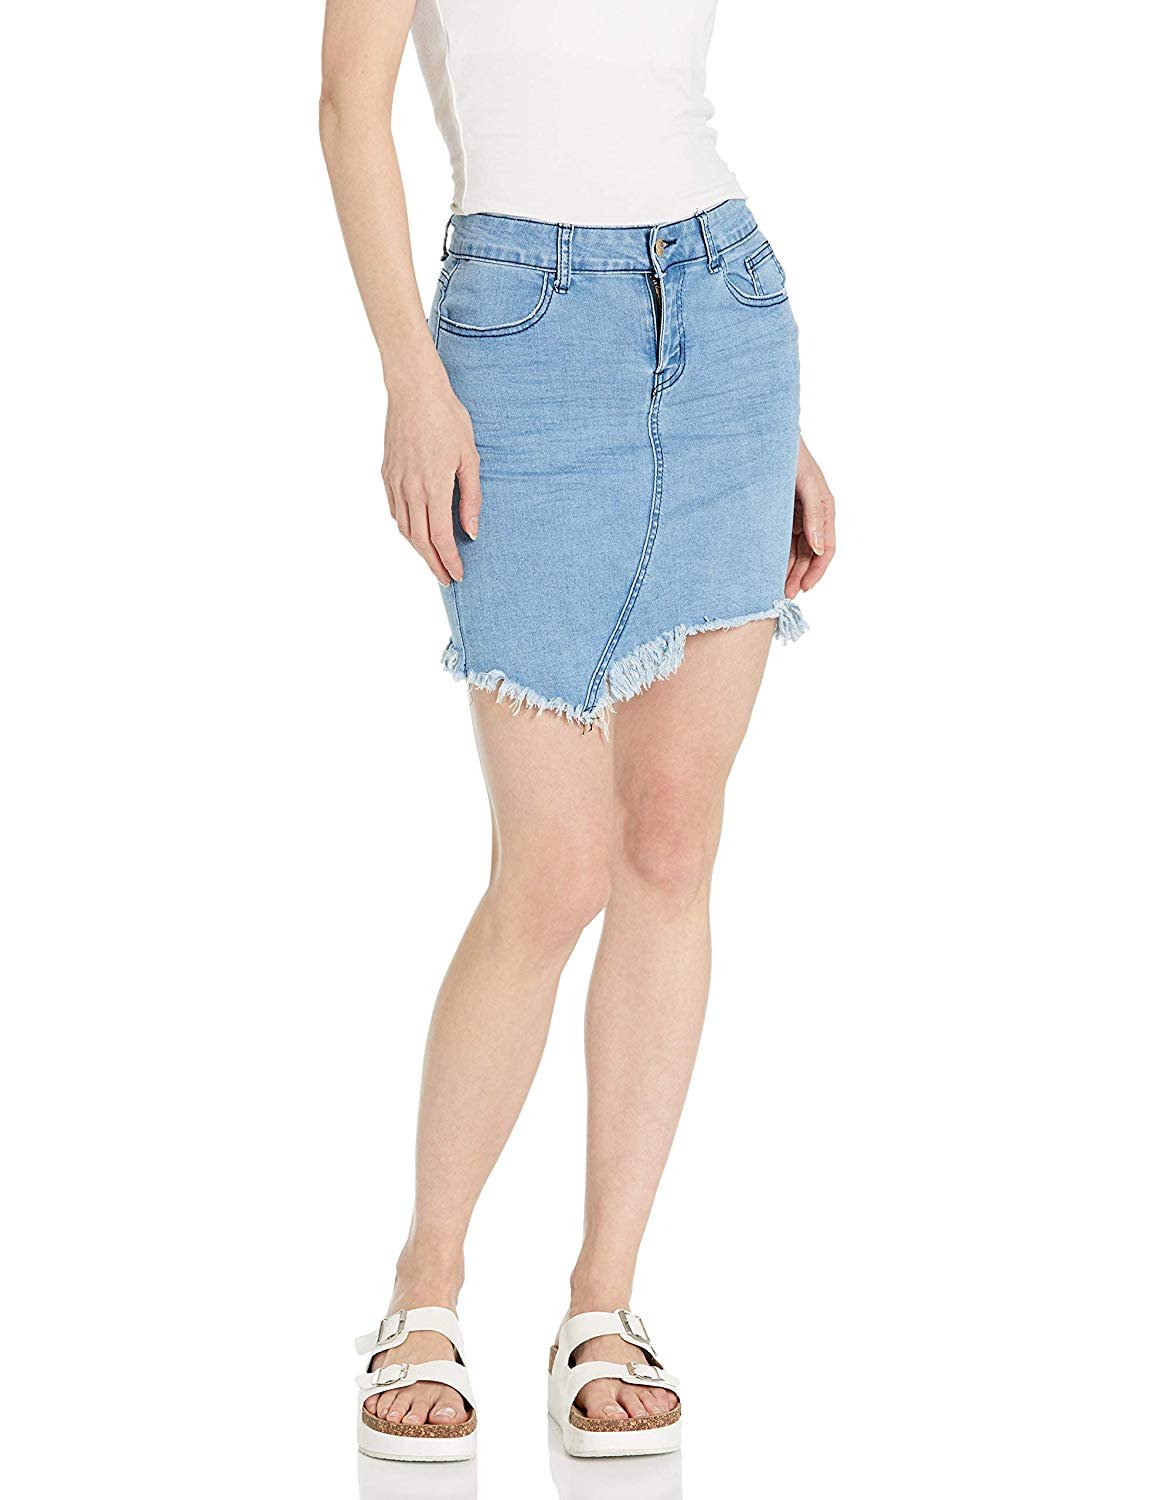 CG JEANS Denim Skirt for Juniors Ripped Distressed Fringe Hem Cute and Sexy, Medium Wash, Small - image 1 of 2